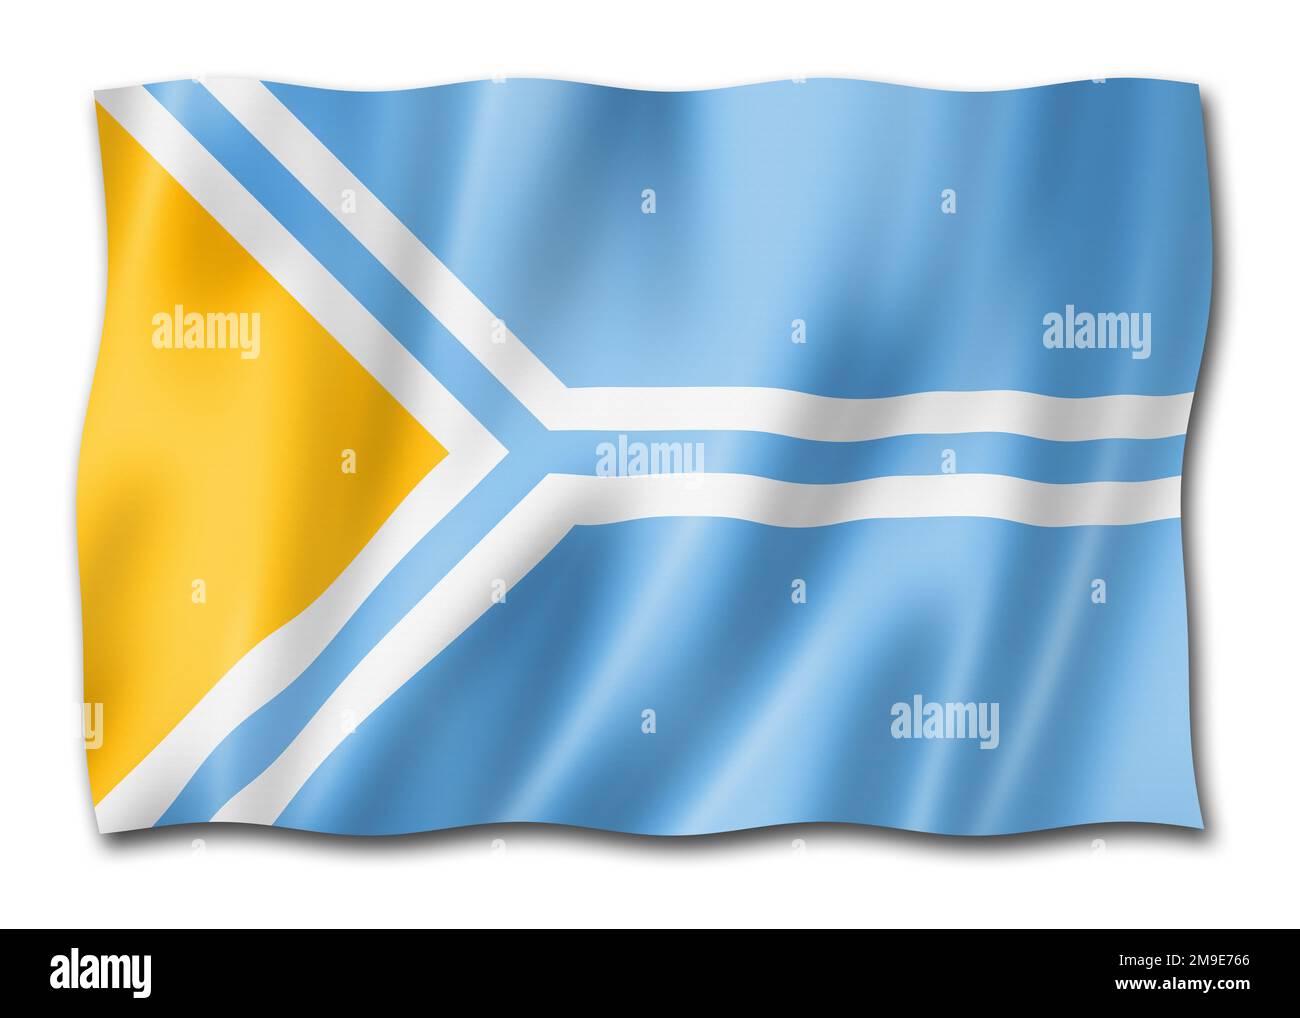 Tuva state - Republic -  flag, Russia waving banner collection. 3D illustration Stock Photo